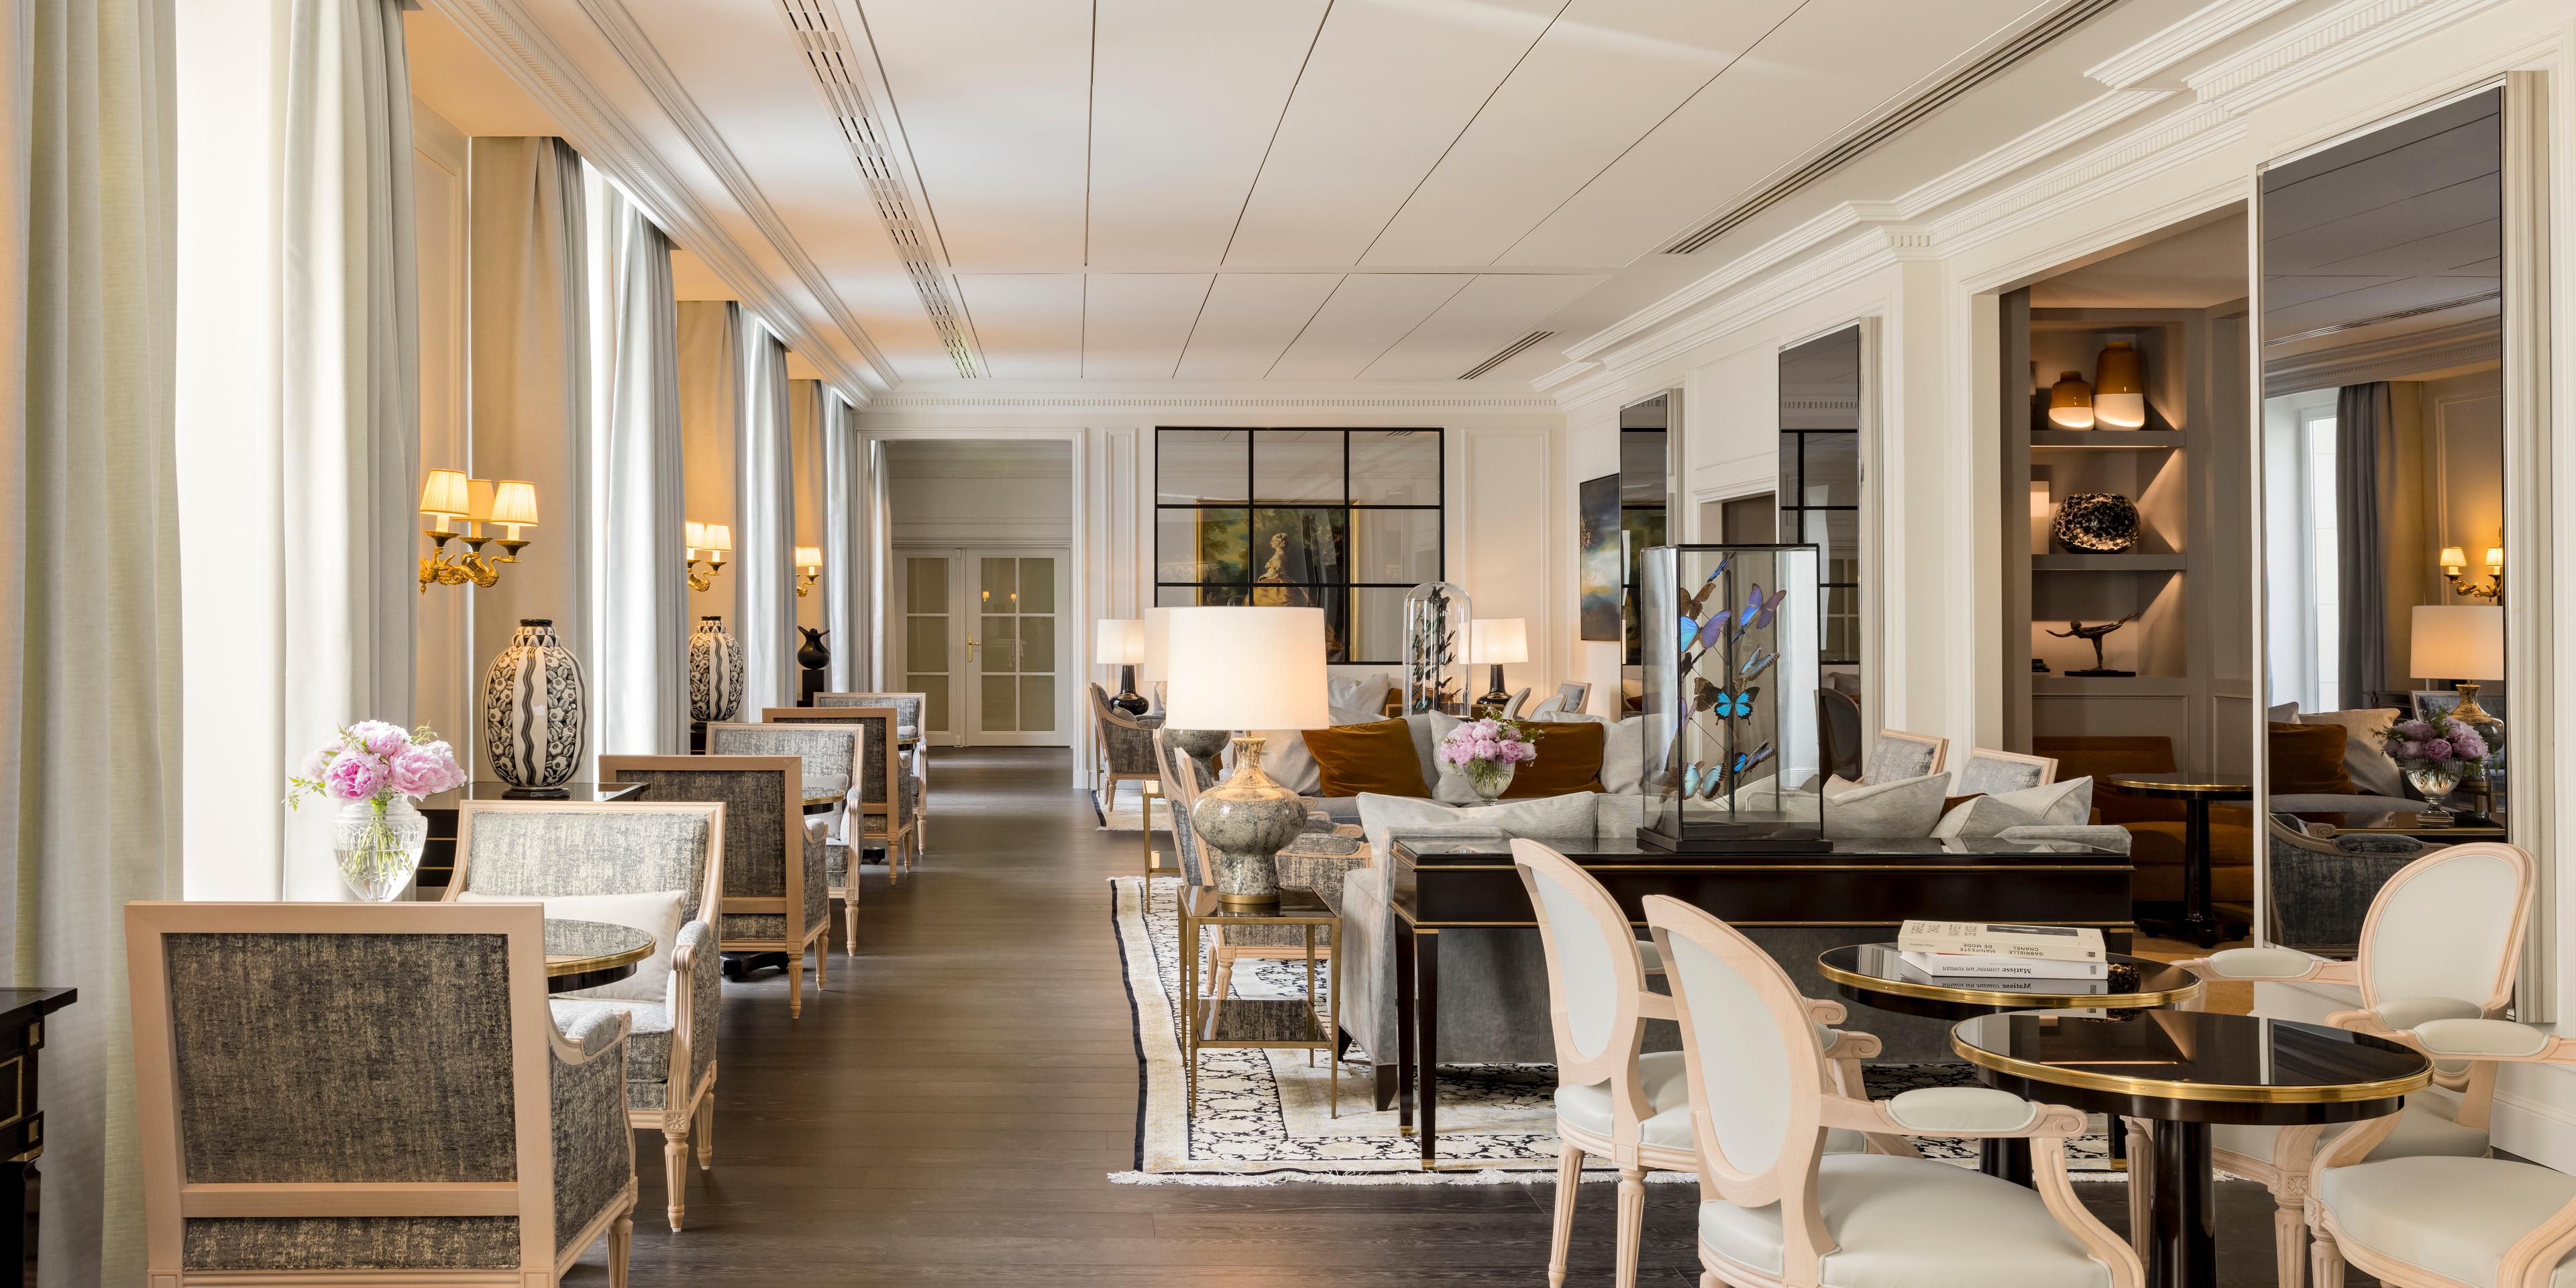 The Club Lounge combines personal touches with exclusive privileges and signature moments to make your stay even more exceptional. InterContinental Paris - Le Grand is inaugurating its new fully renovated Club Lounge for a refined and intimate experience.